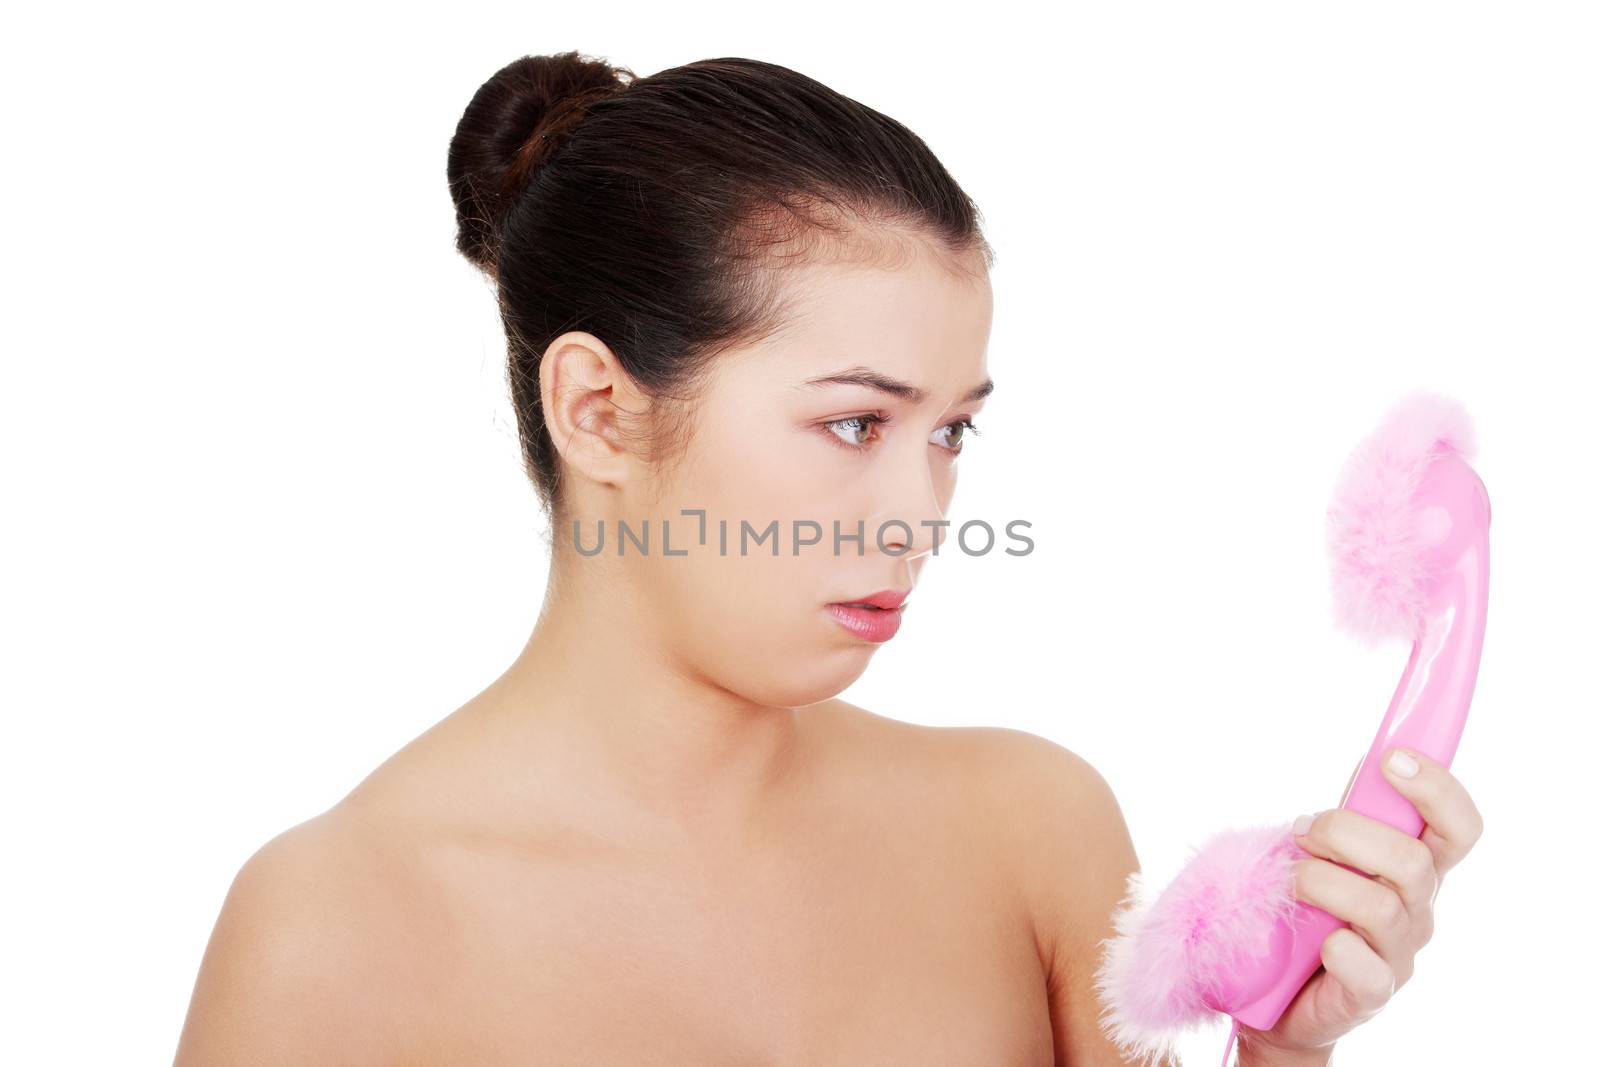 Disappointed woman looking on pink handset, isolated on white